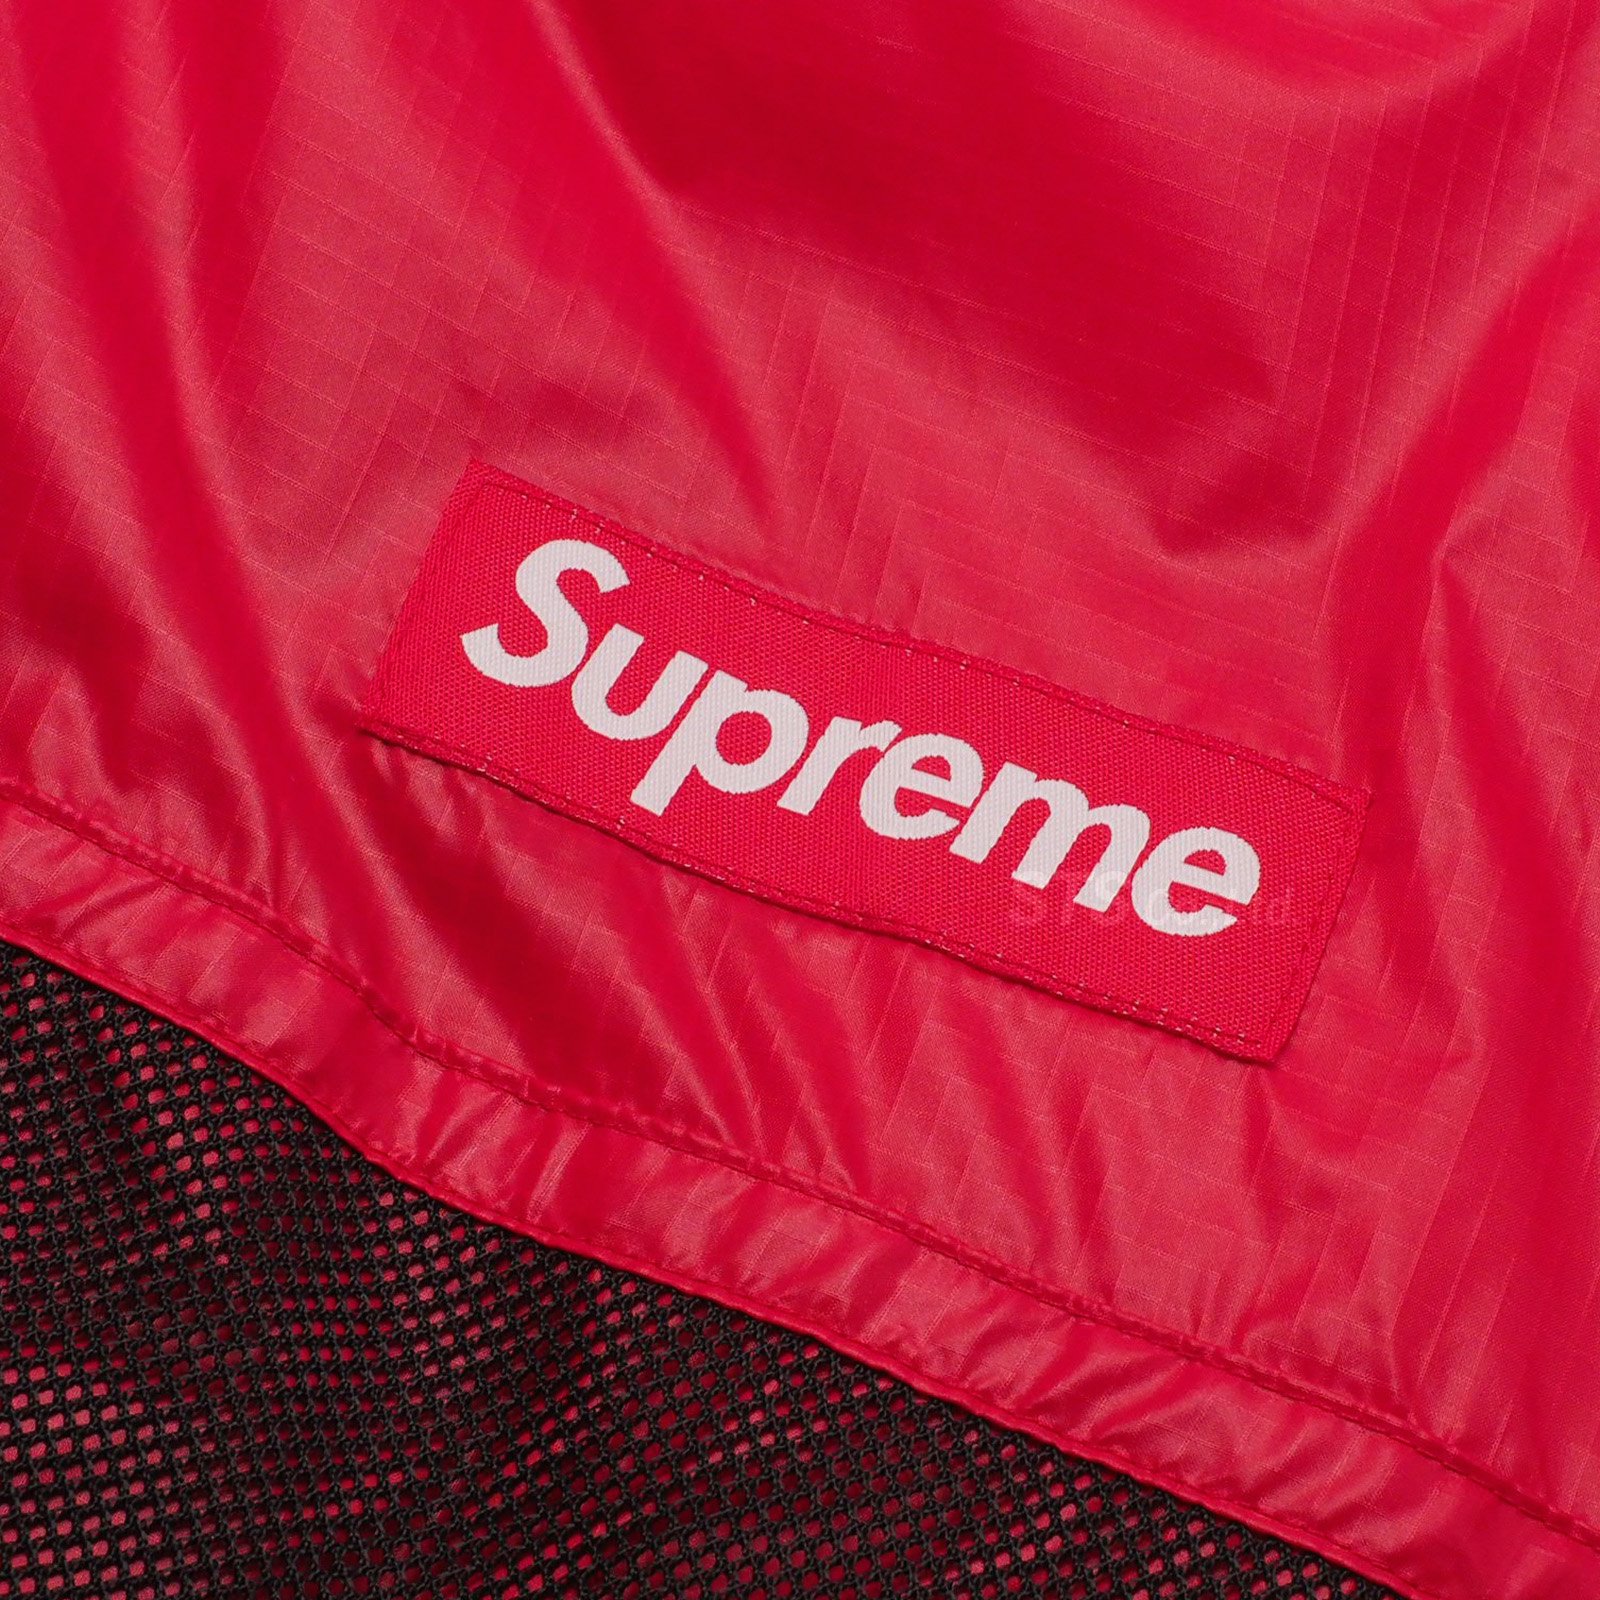 Supreme - Reversible Featherweight Down Puffer Jacket - ParkSIDER